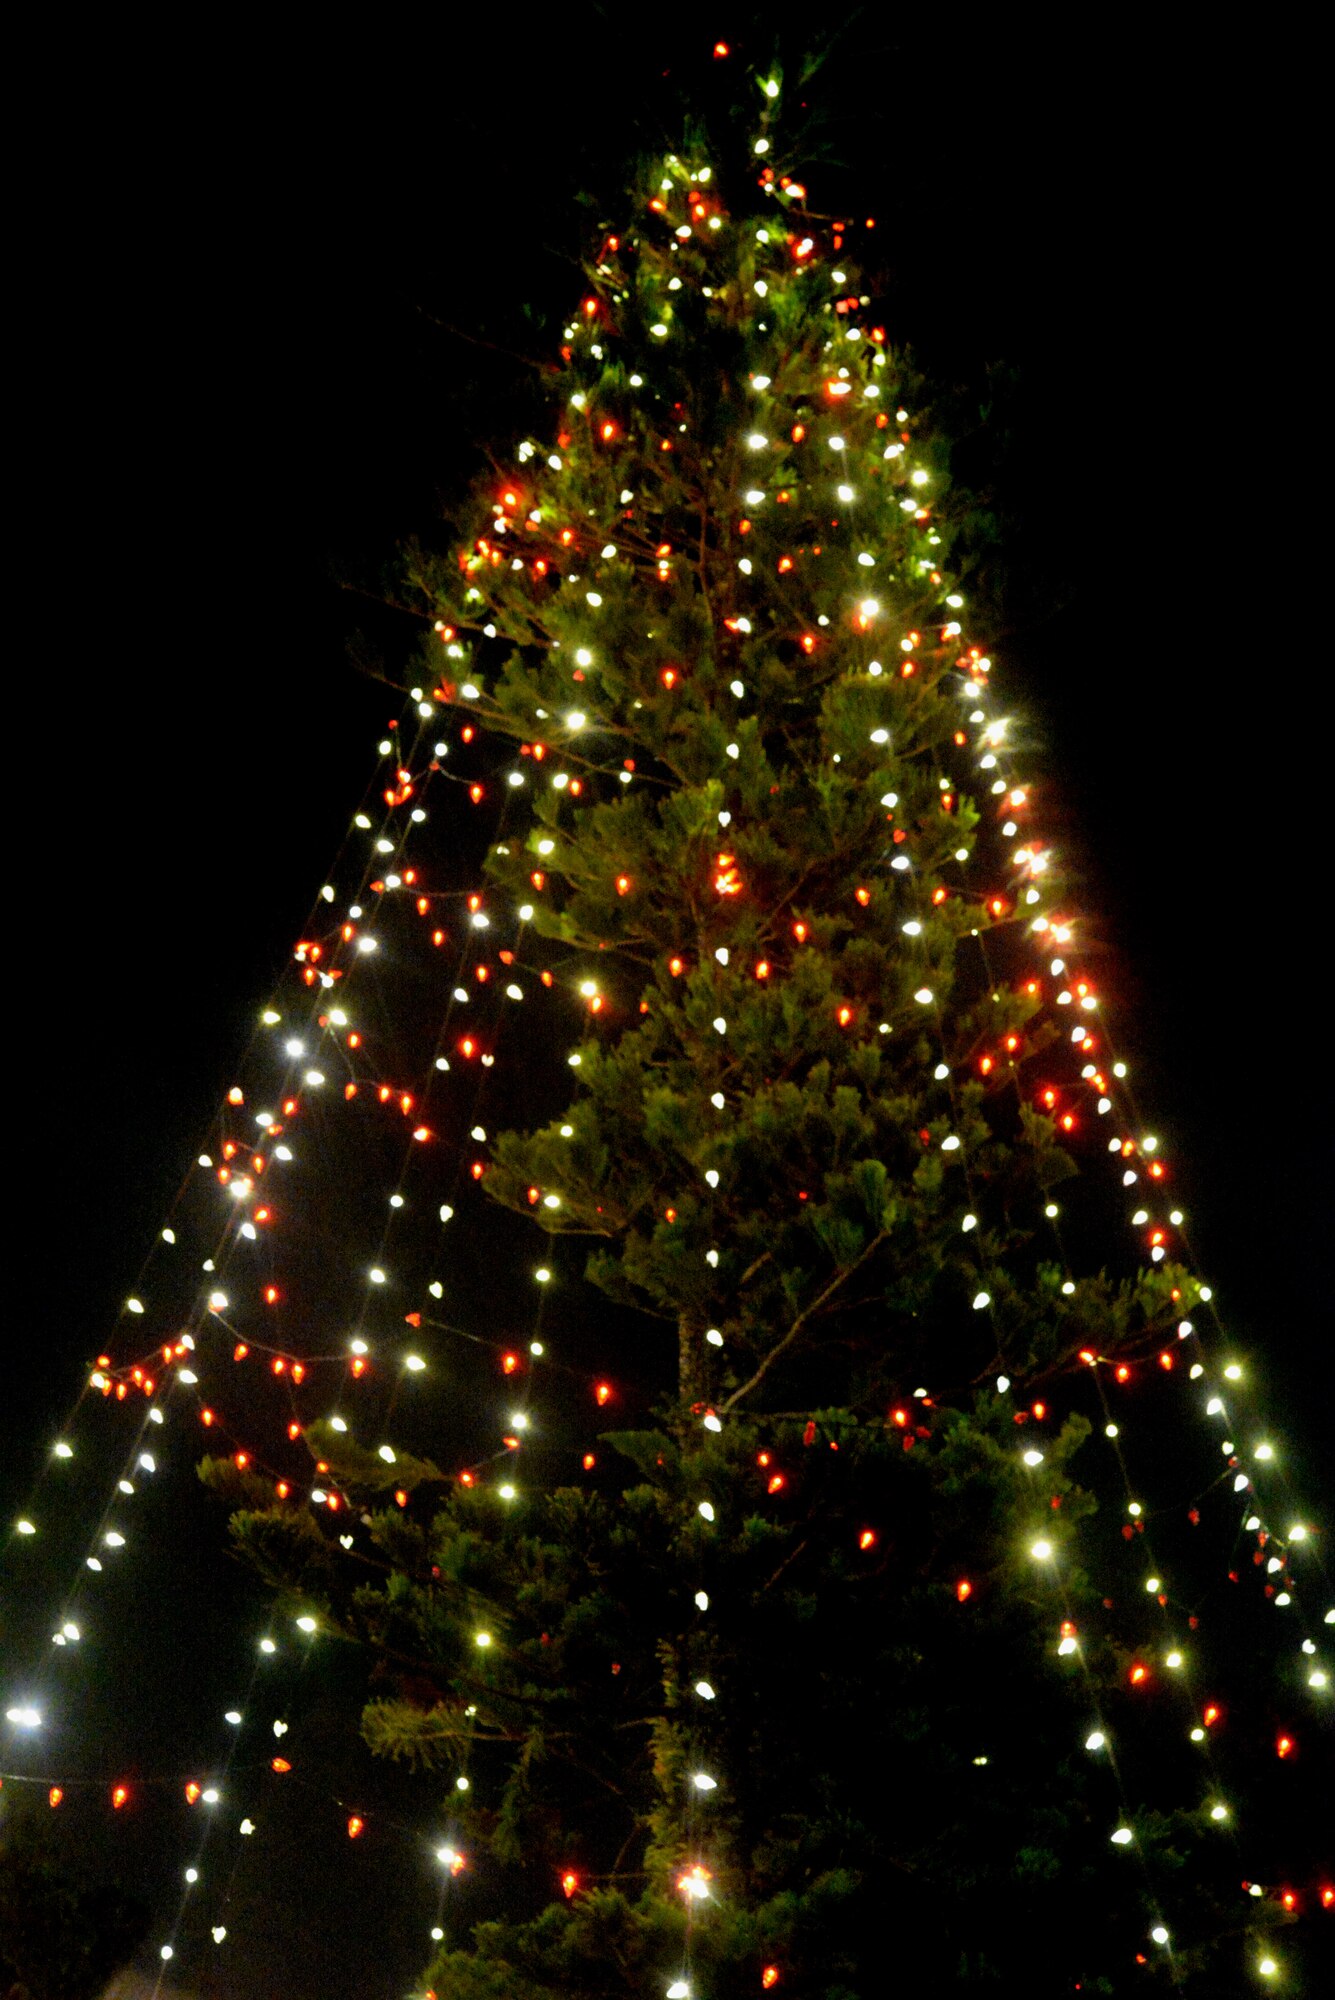 The holiday tree is lit for the first time during the annual tree lighting ceremony Dec. 1, 2015, at Andersen Air Force Base, Guam. Approximately 300 people attended the ceremony in celebration of the holiday season. (U.S. Air Force photo by Airman 1st Class Jacob Skovo/Released)